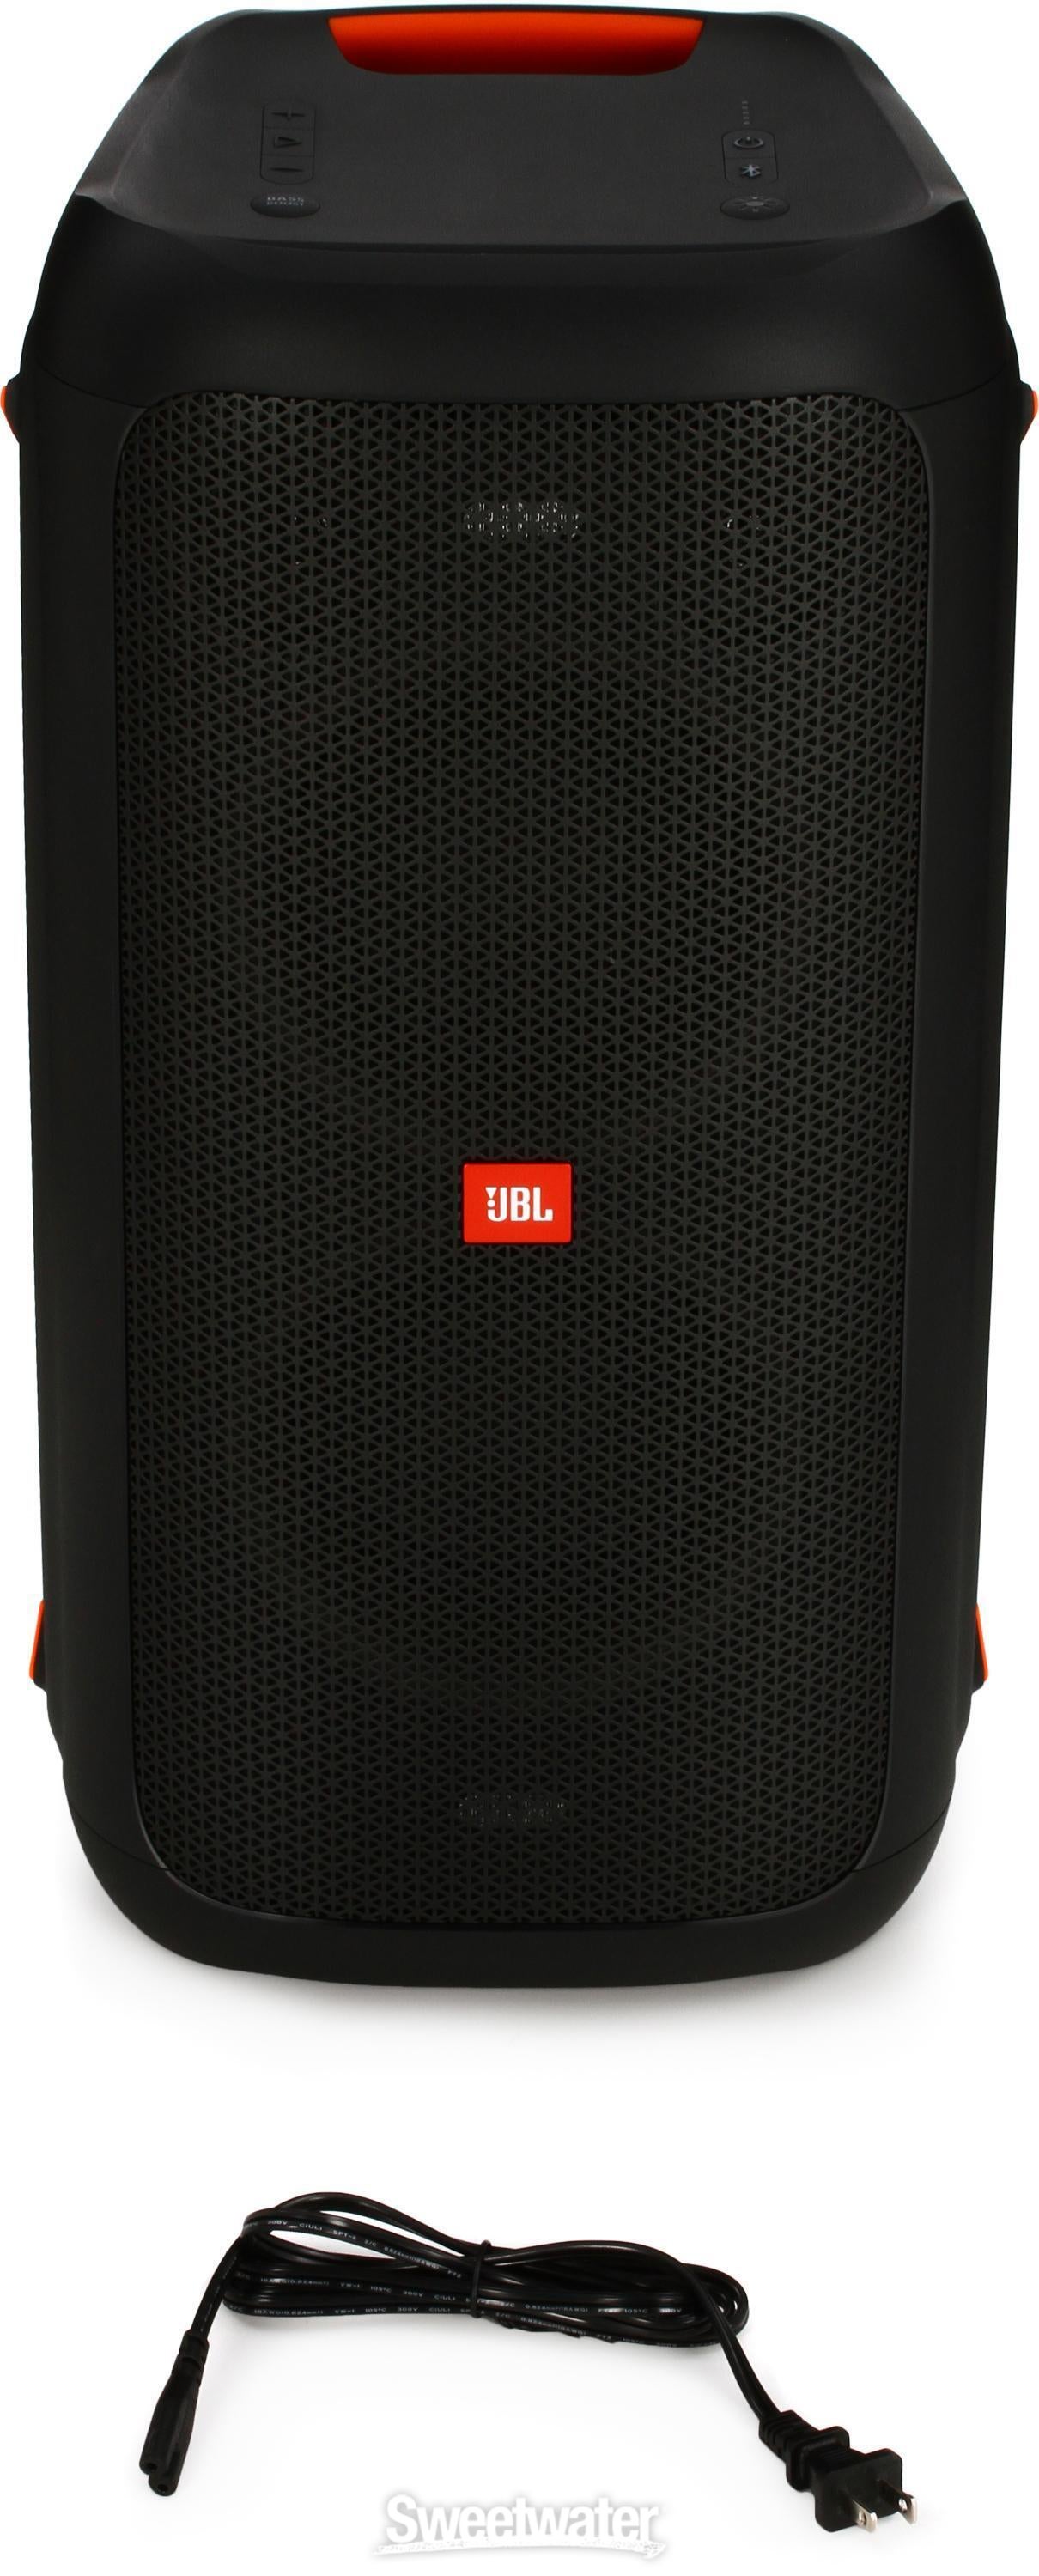 JBL Lifestyle PartyBox 100 Portable Bluetooth Speaker with